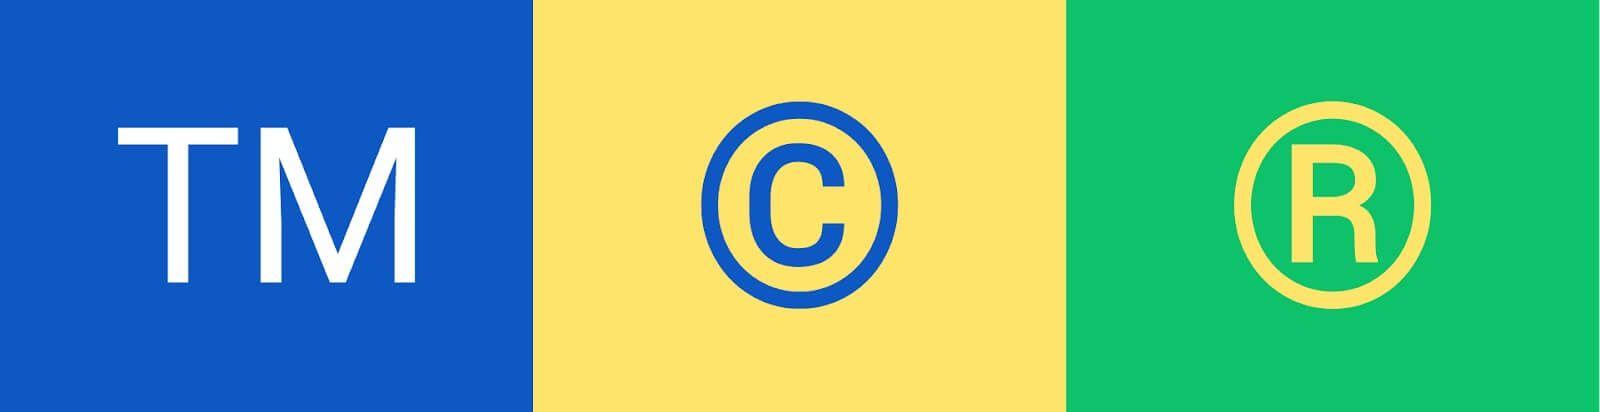 How to protect intellectual property for startups: Trademarks, Copyright, Patents